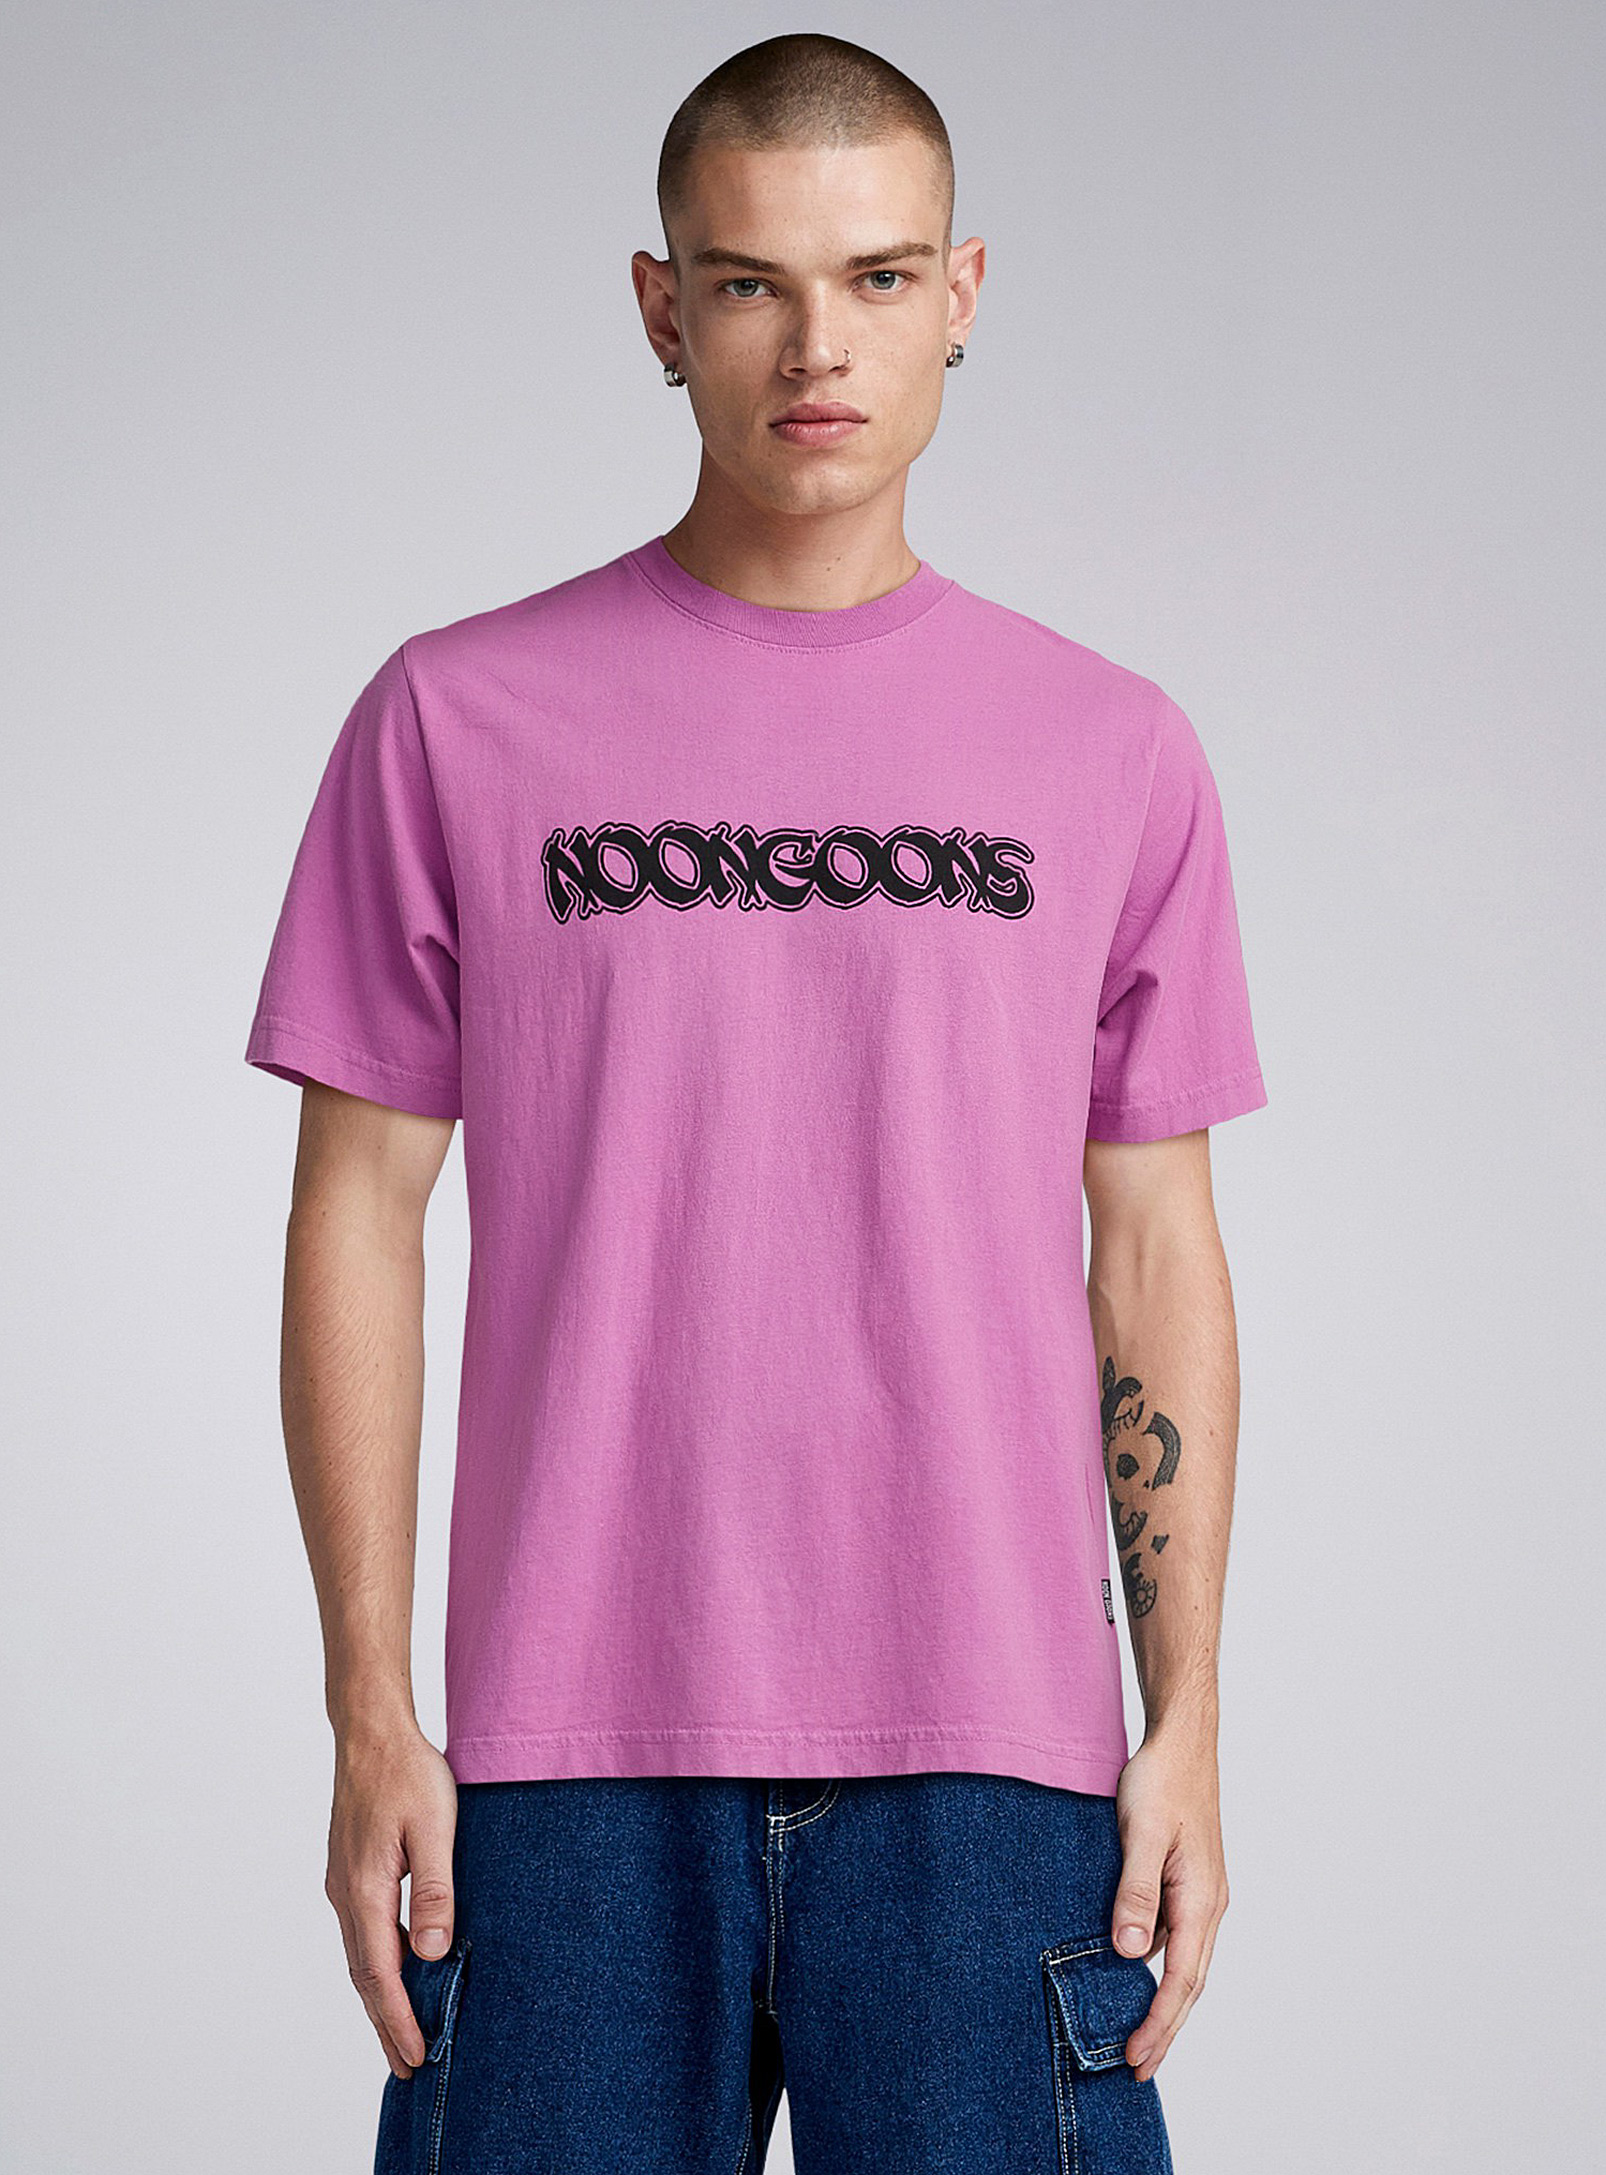 Noon Goons Noodle Logo T-shirt In Pink